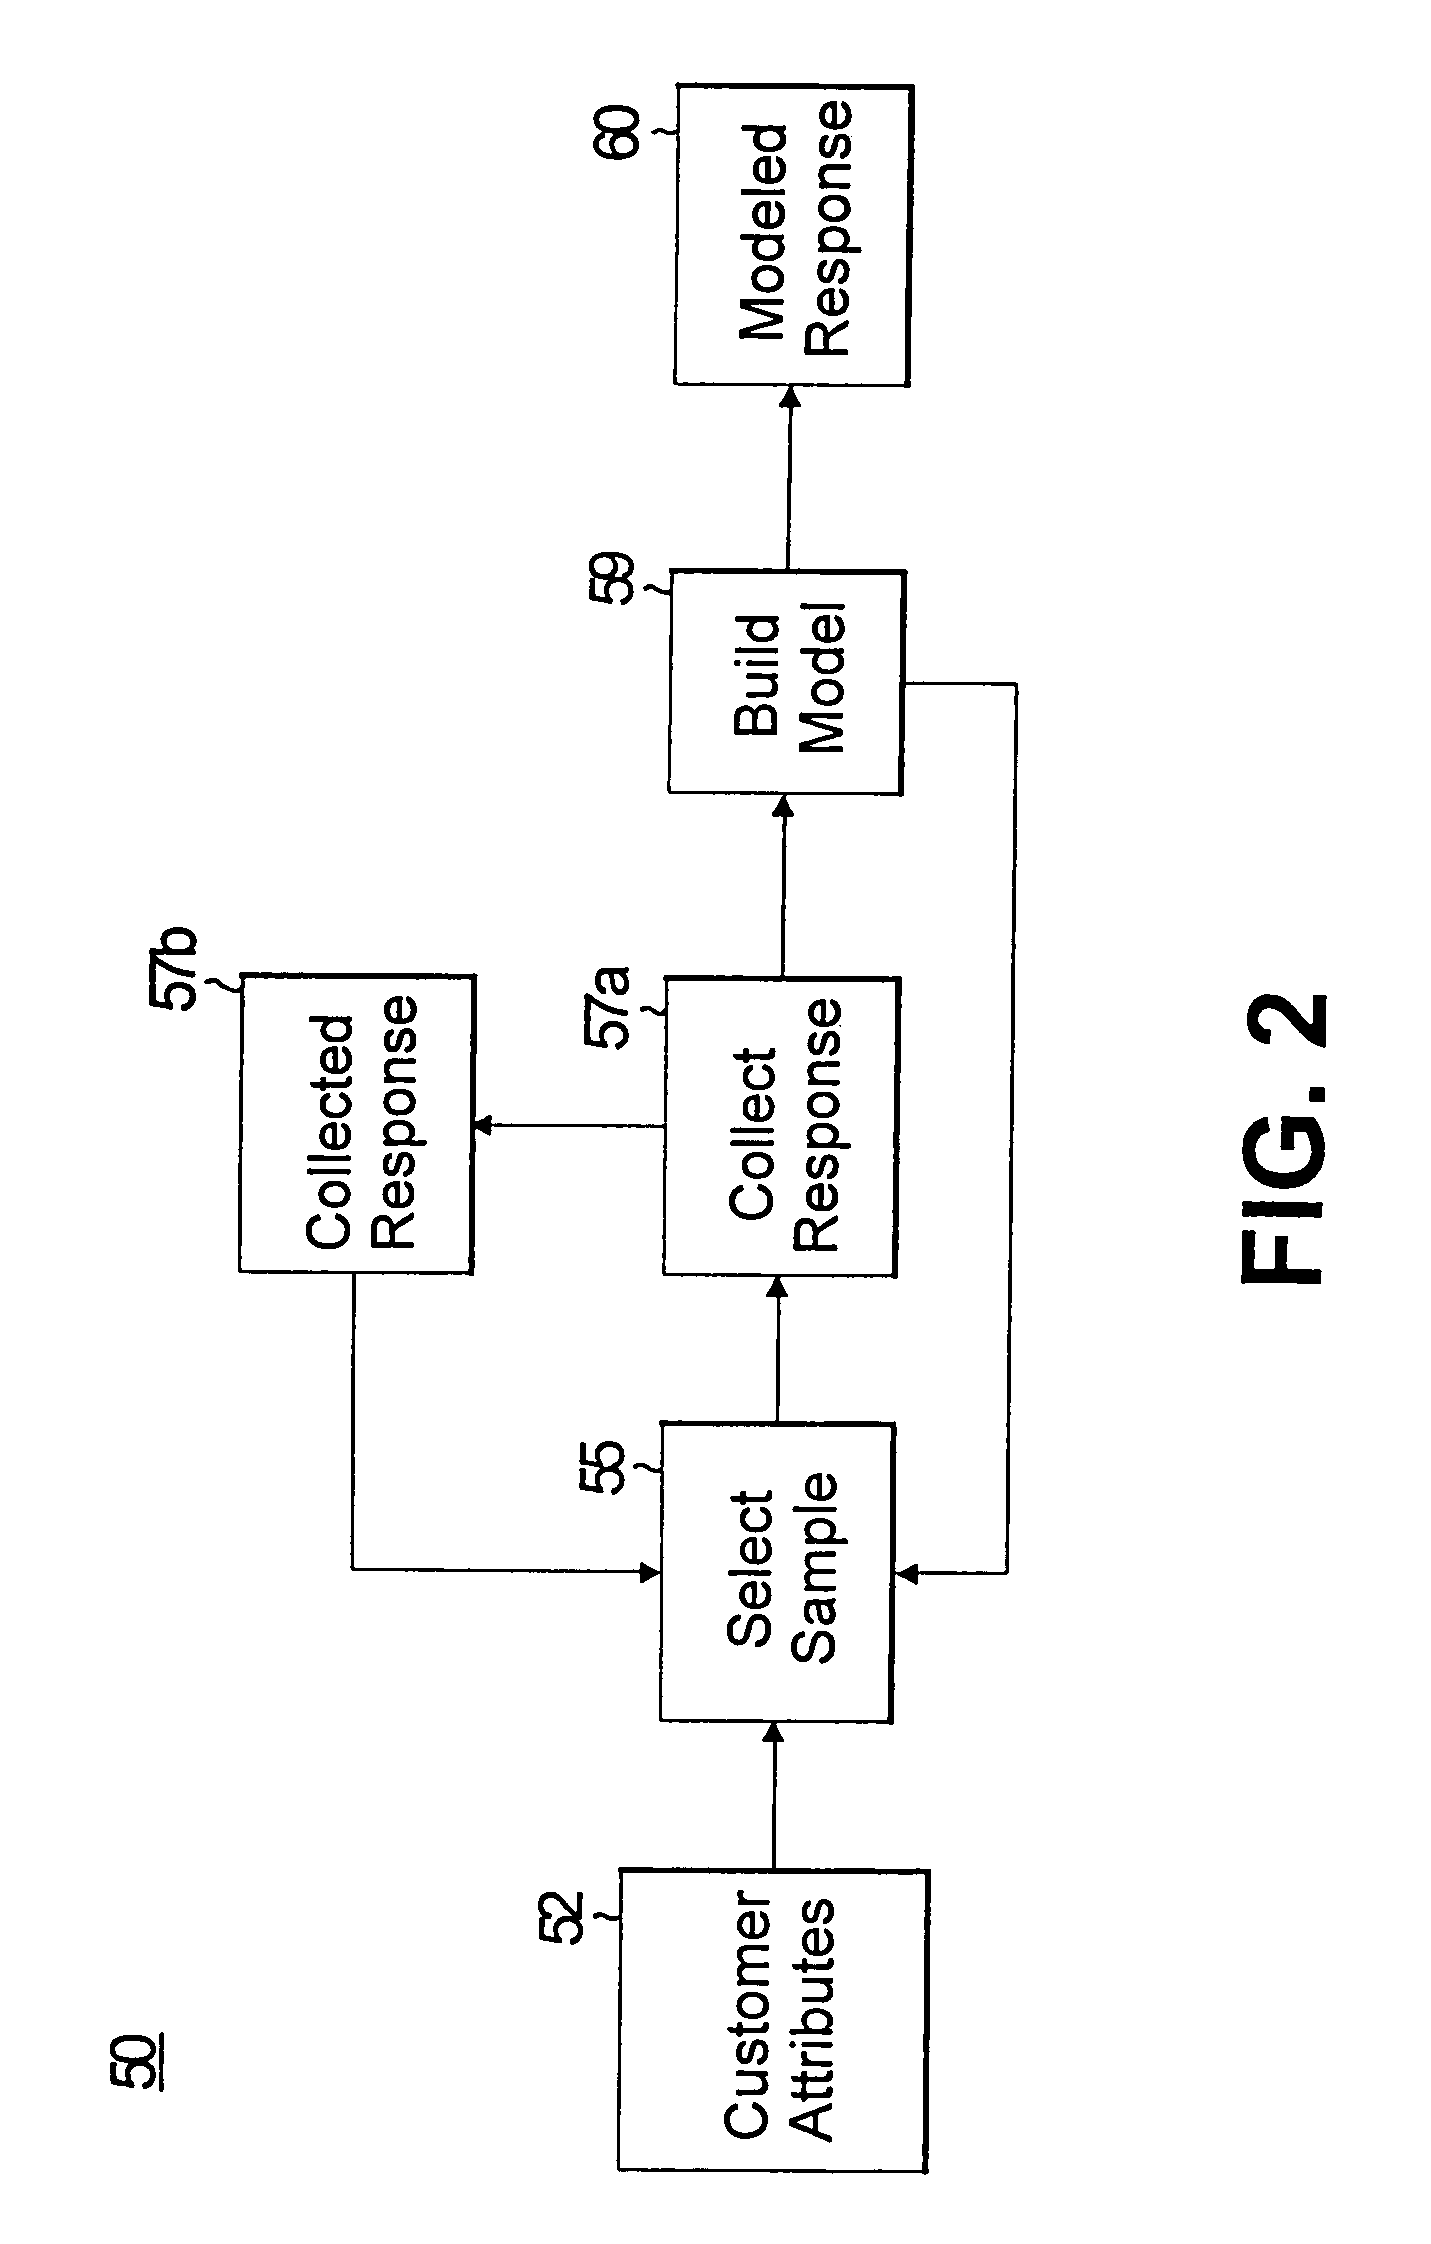 System and method for efficiently generating models for targeting products and promotions using classification method by choosing points to be labeled